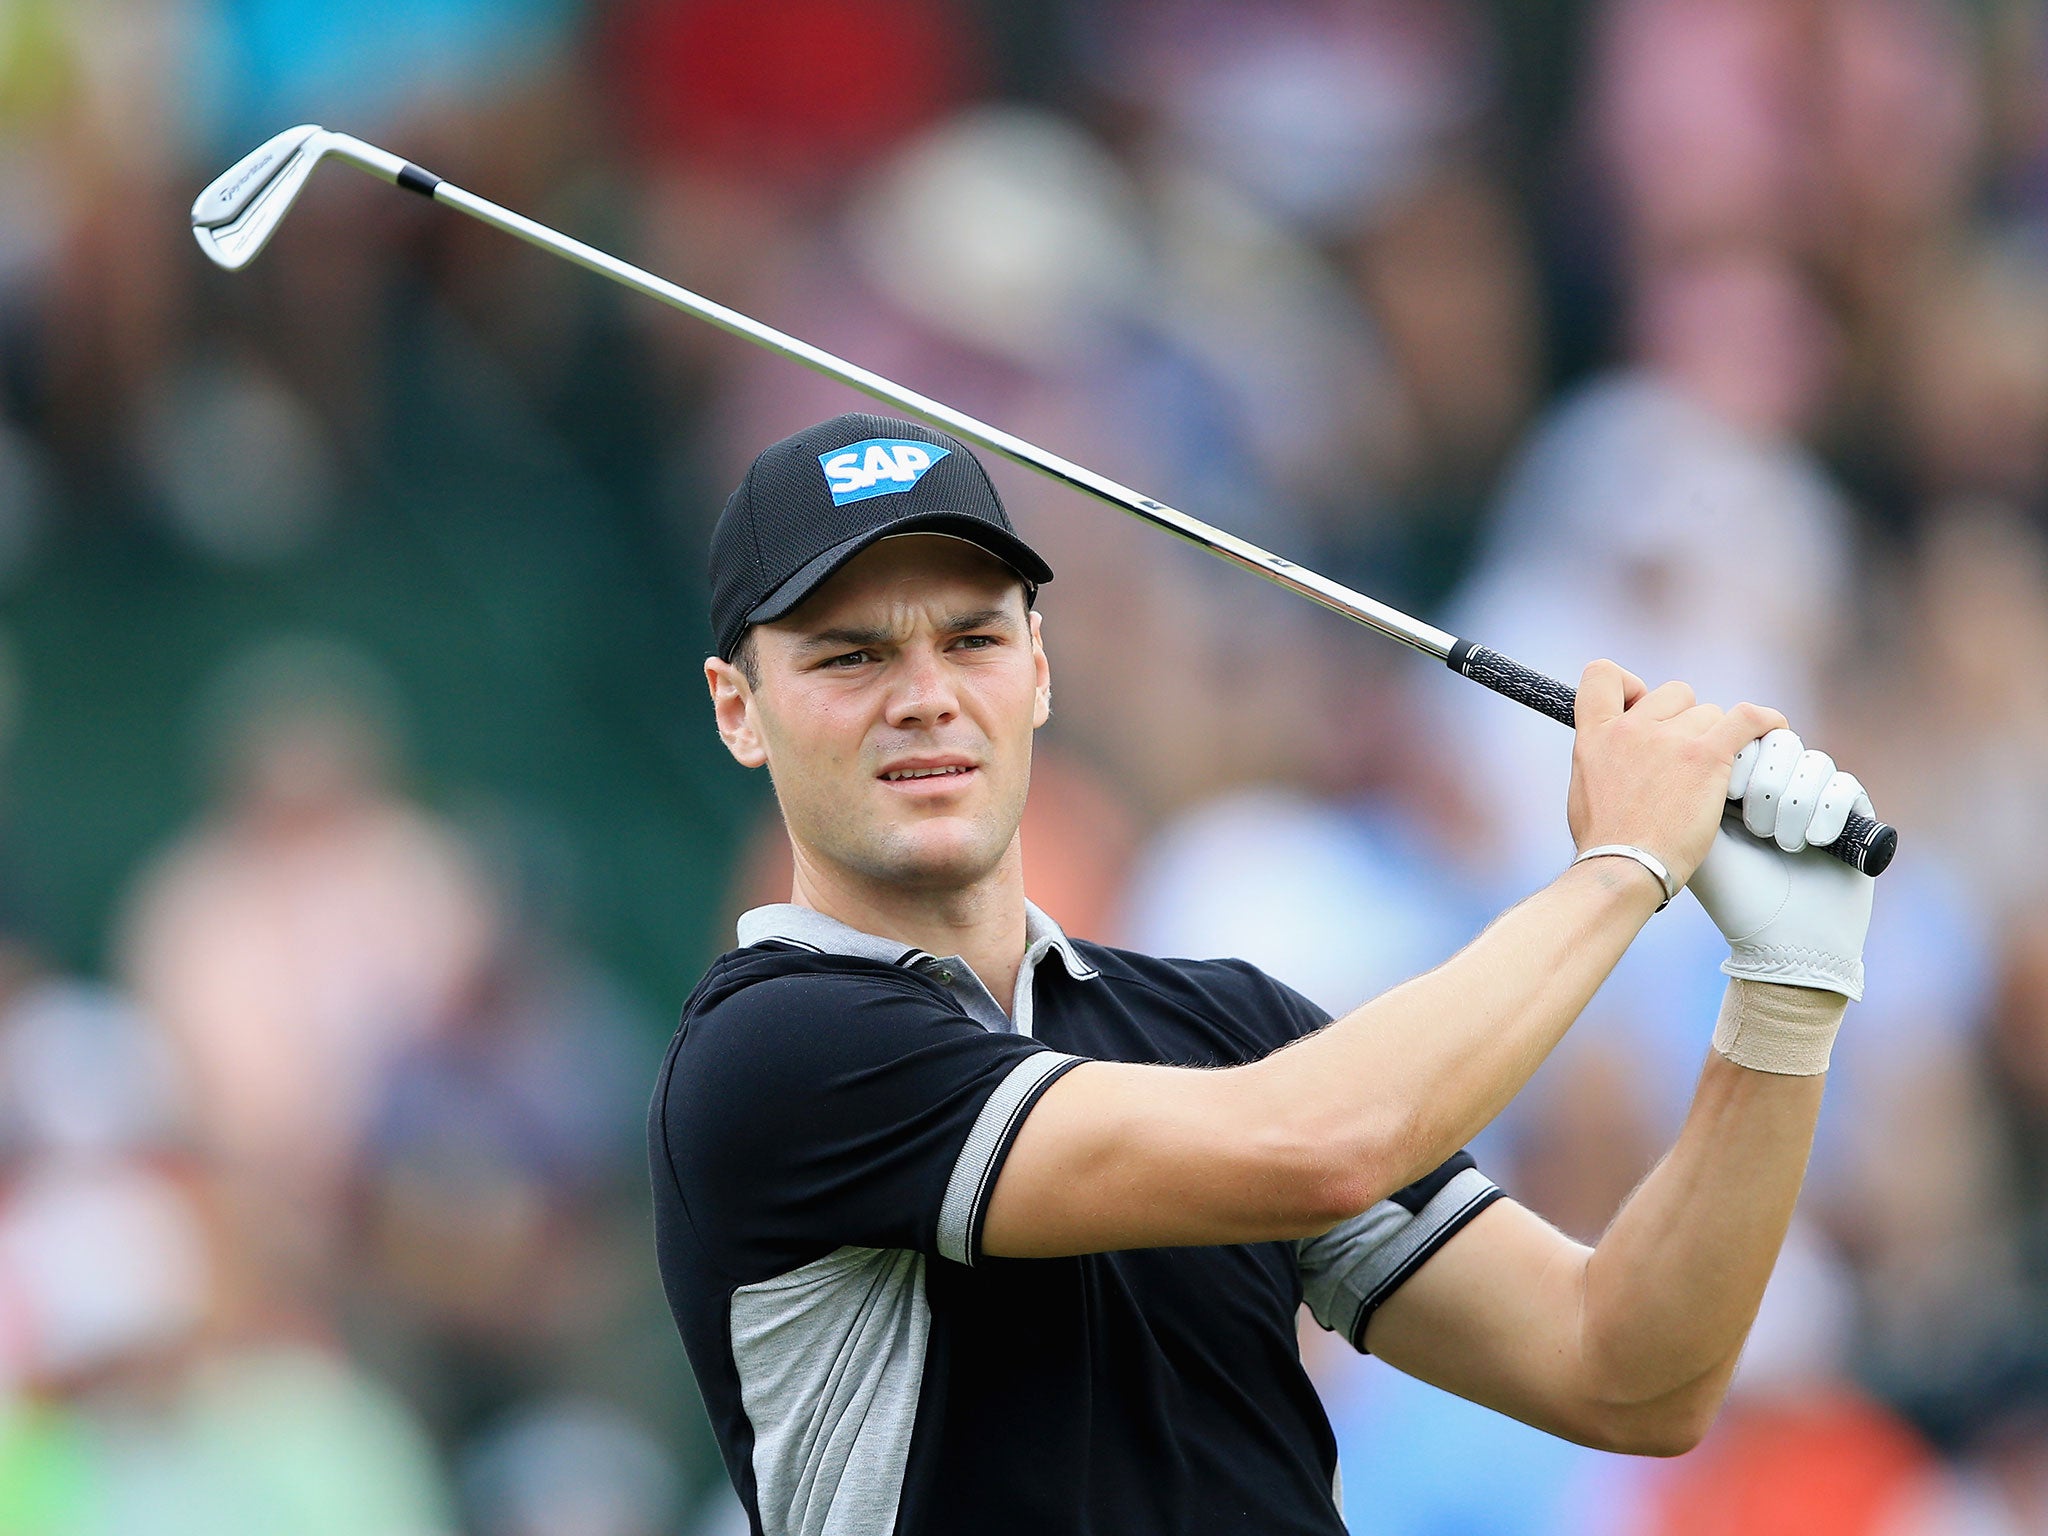 Martin Kaymer leads the US Open by five shots on day two